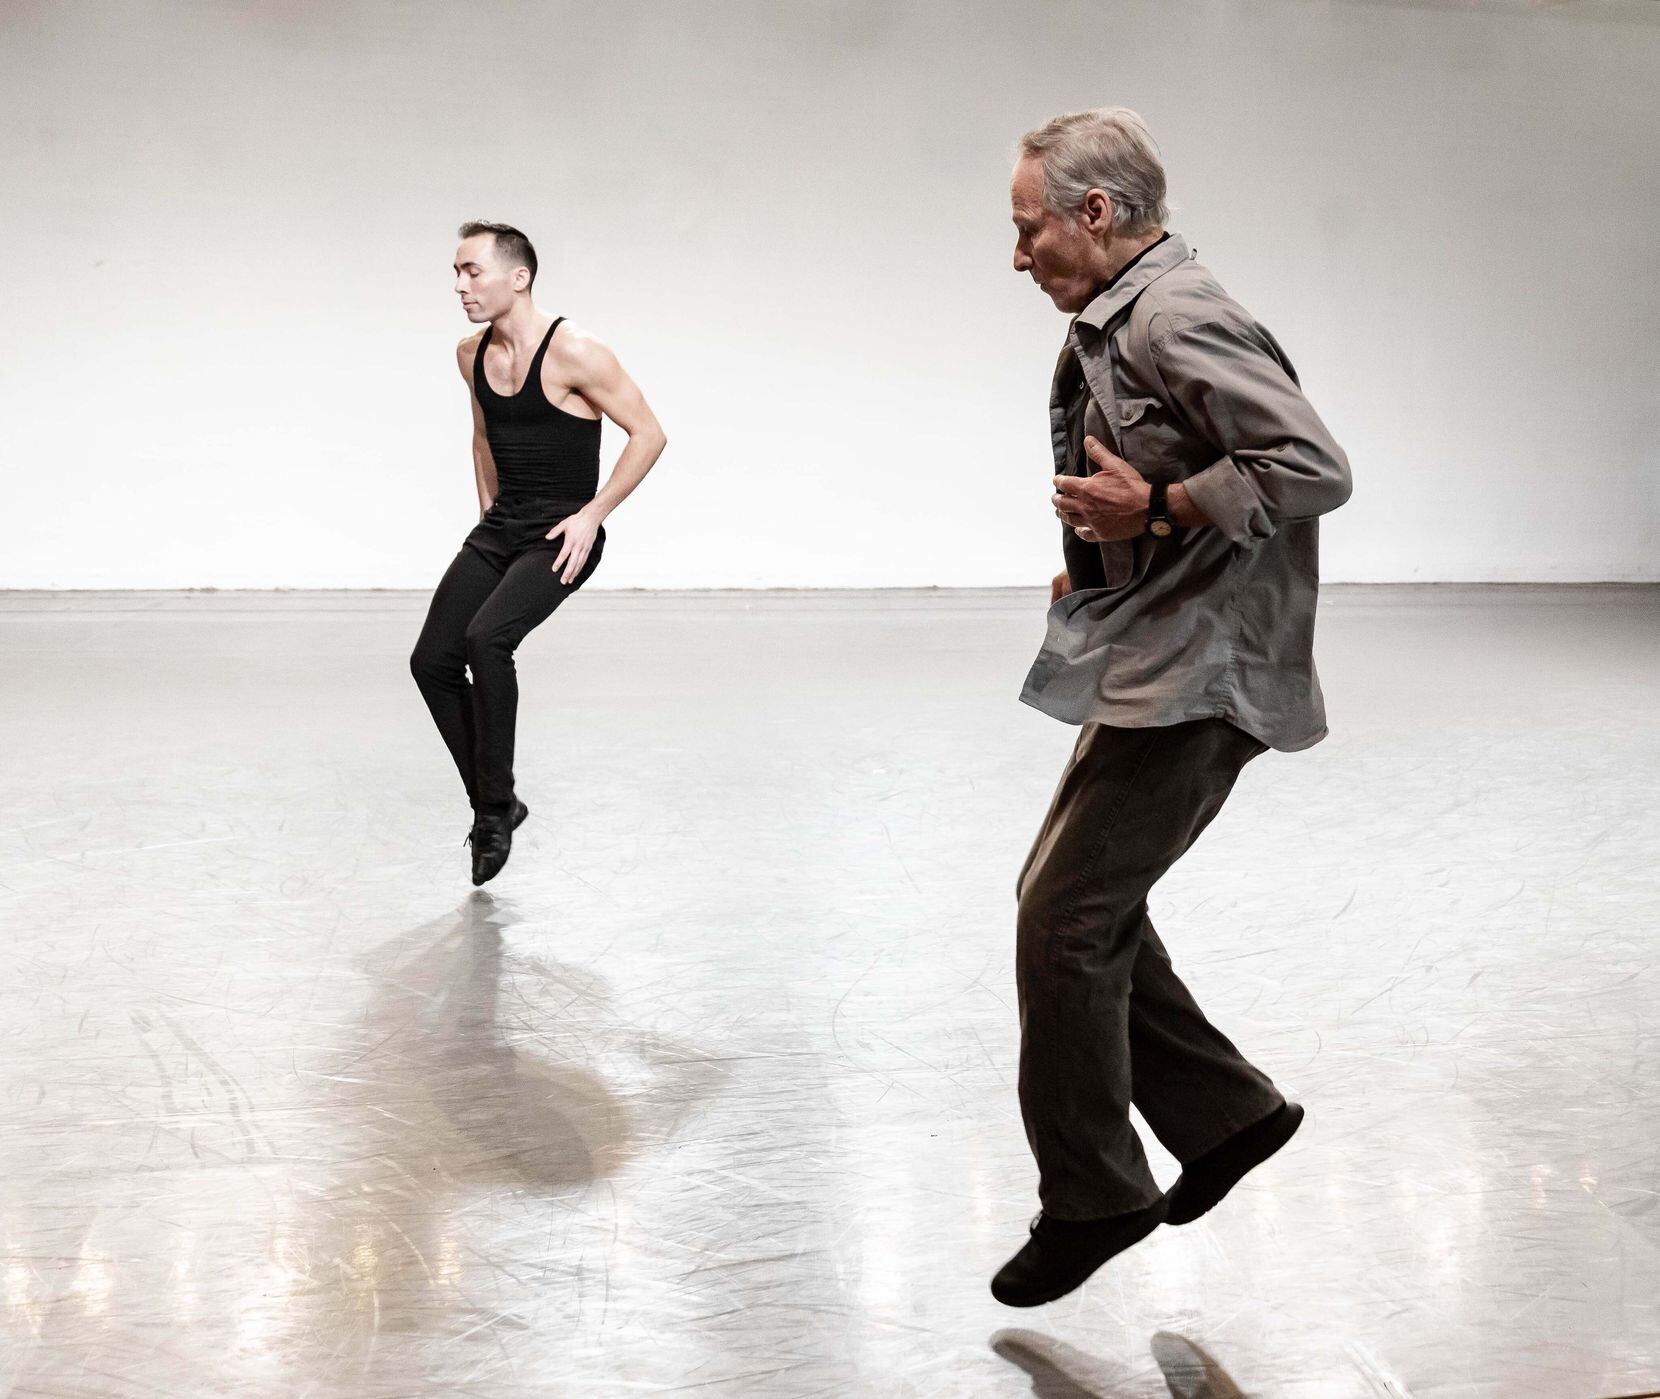 The 78-year-old choreographer Lar Lubovitch (right) gets airborne as he coaches Bruce Wood...